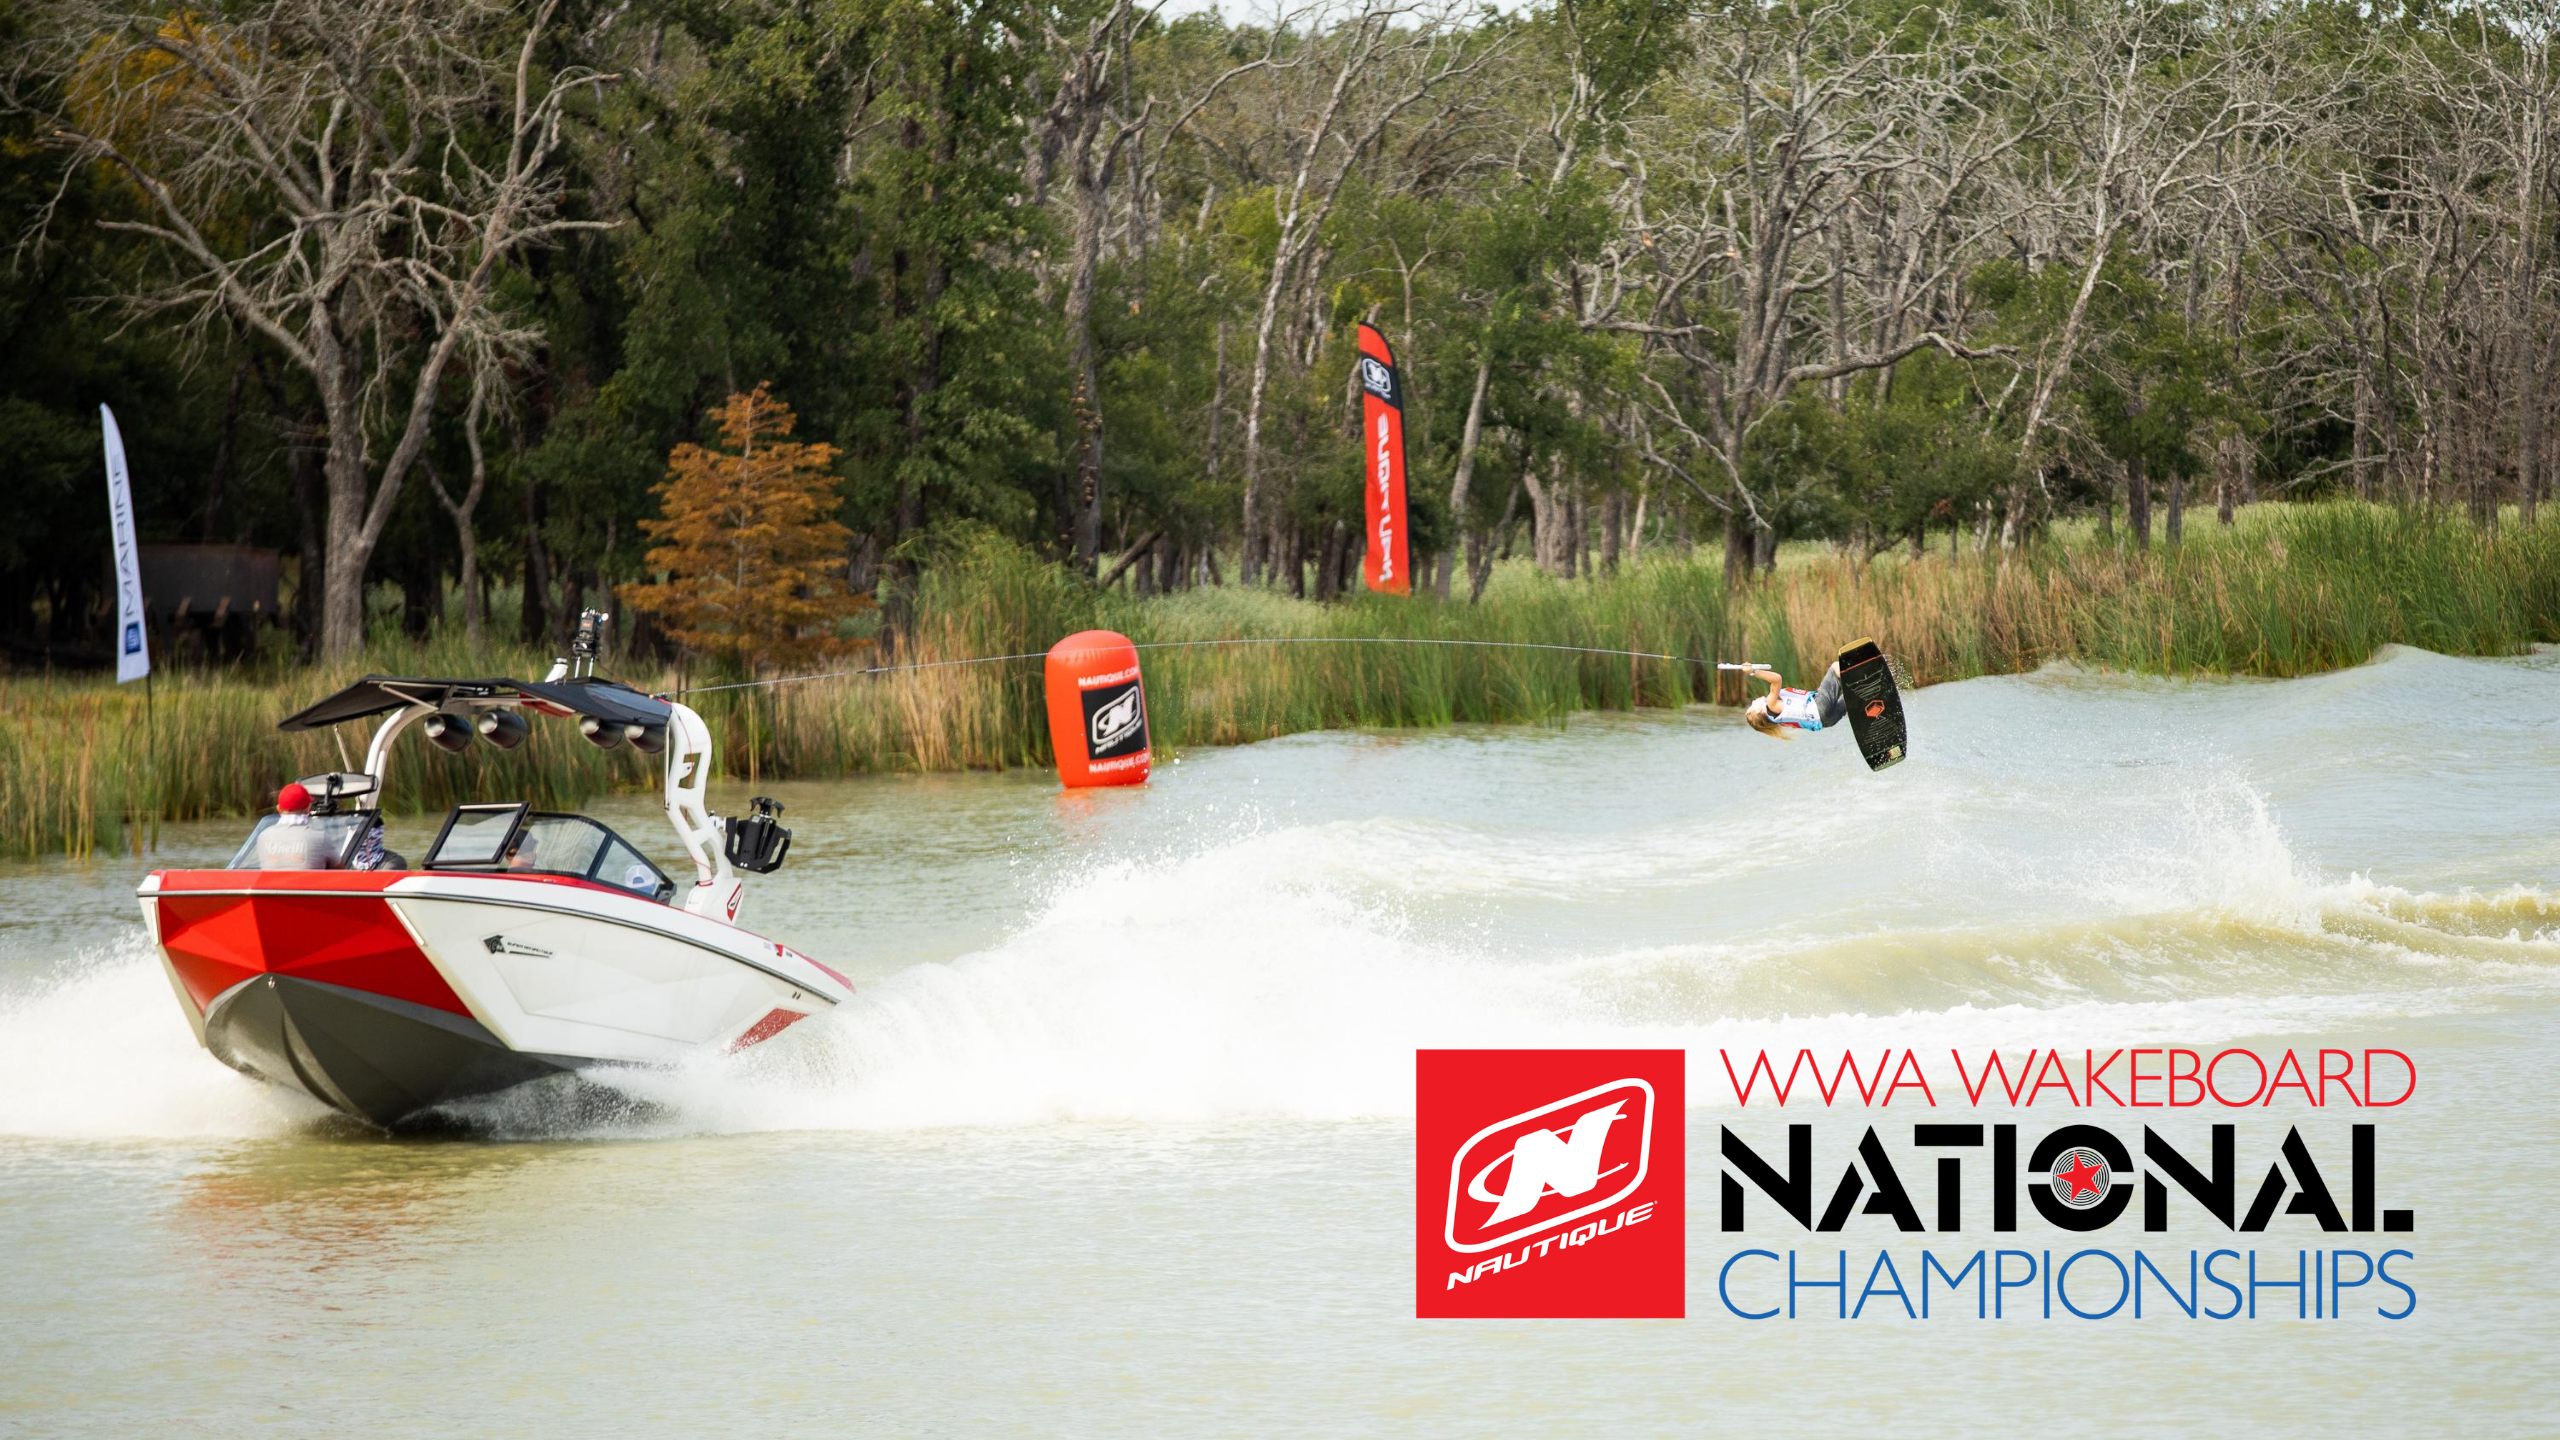 AMATEURS THROW DOWN ON DAY ONE OF THE 2020 NAUTIQUE WWA WAKEBOARD NATIONAL CHAMPIONSHIPS PRESENTED BY GM MARINE ENGINE TECHNOLOGY Xxx Pic Hd